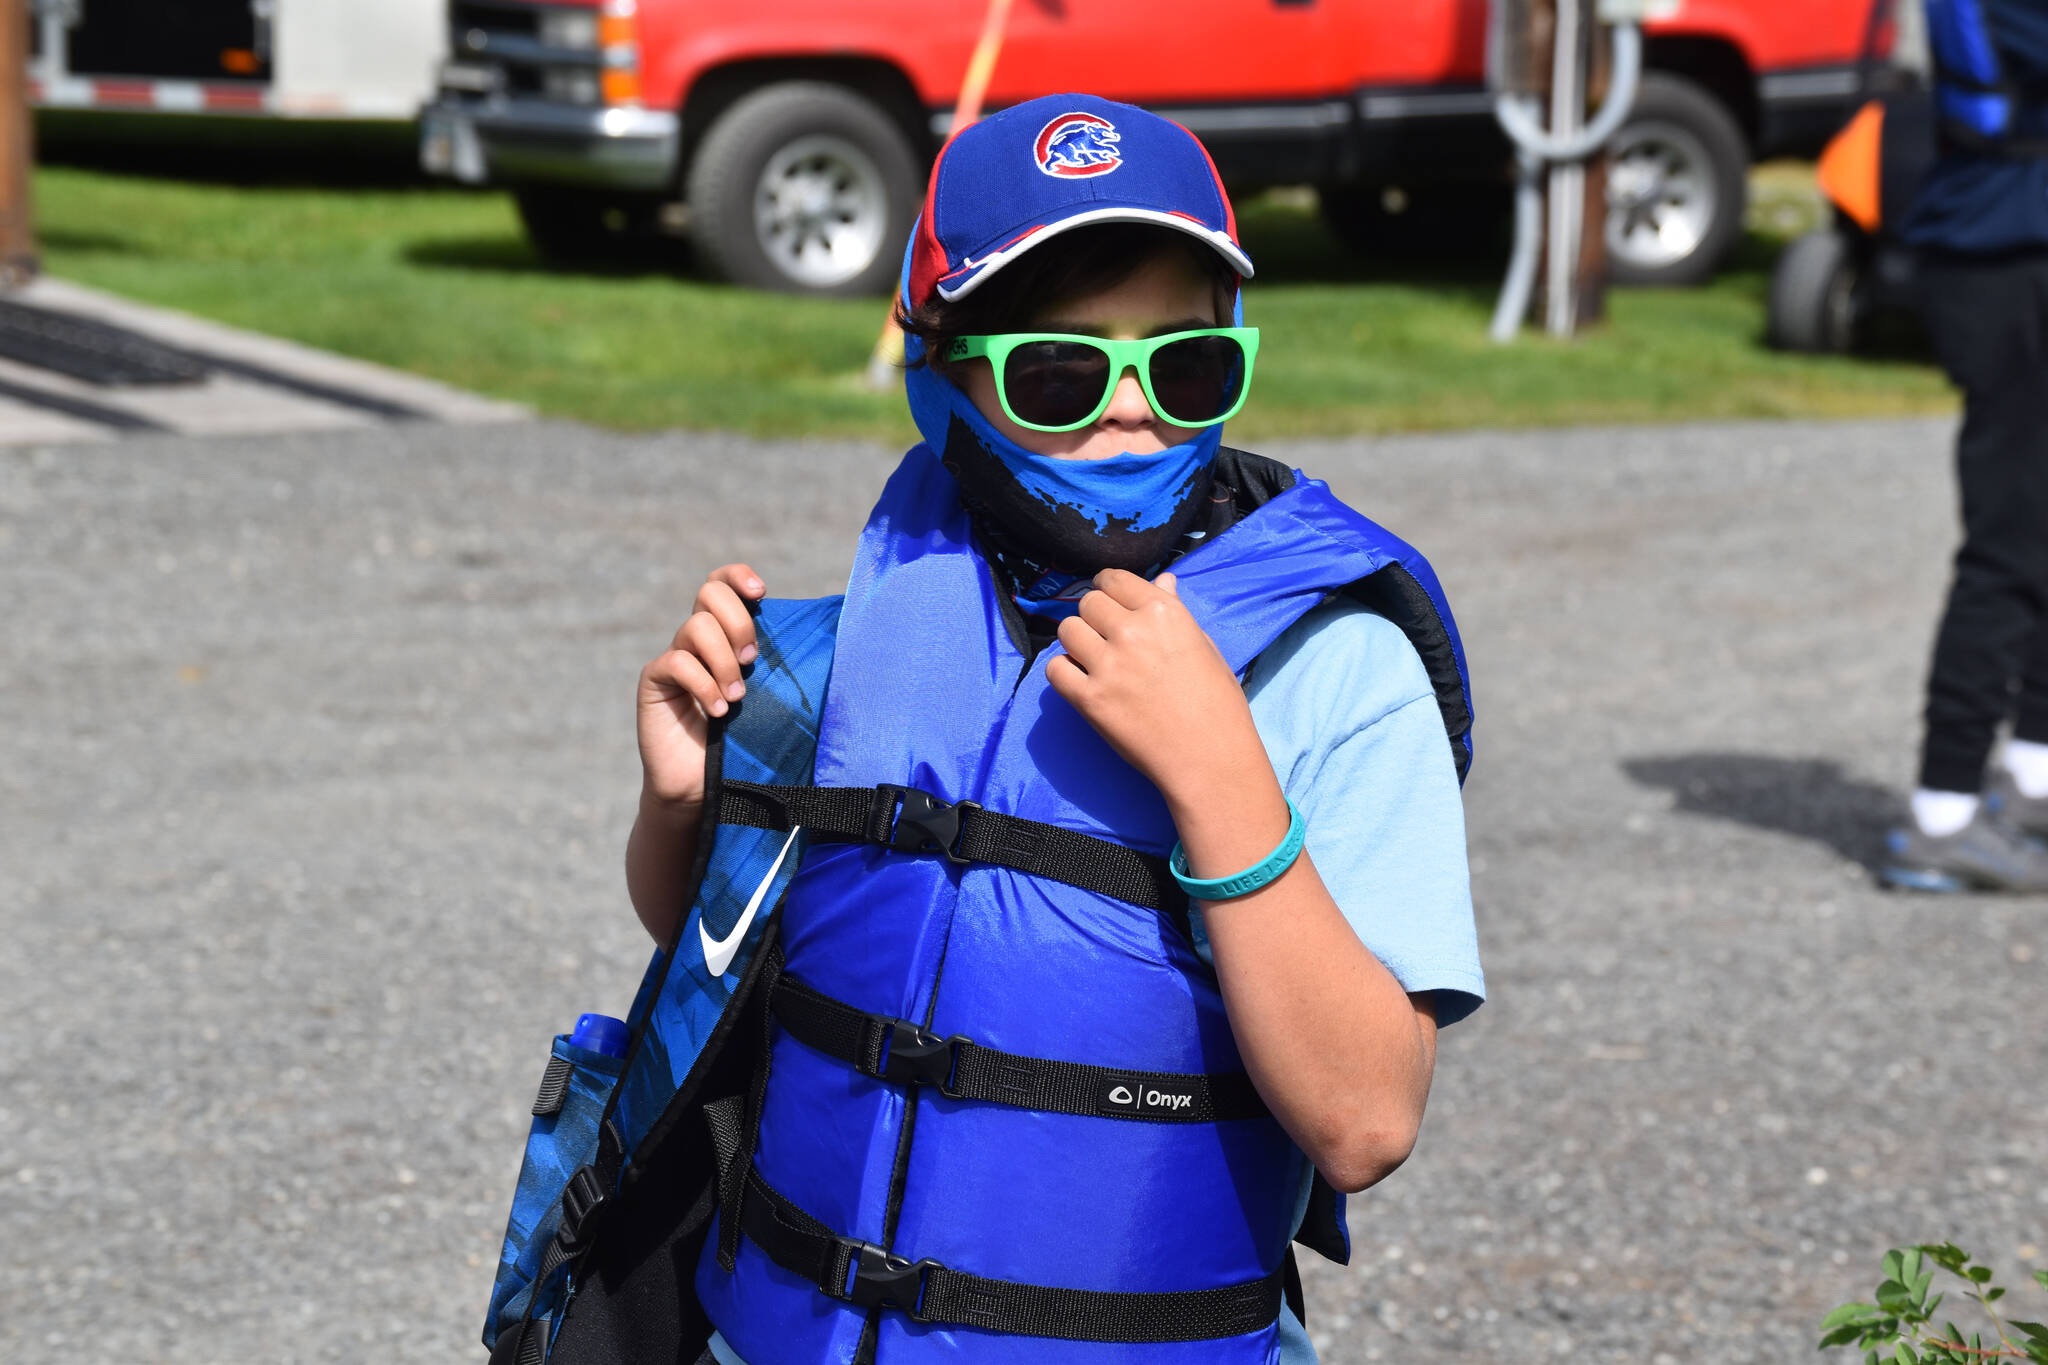 A boy fitted with a life jacket and waiting to go fishing at the Kenai River Junior Classic in Soldotna, Alaska, on Aug. 10, 2022. (Jake Dye/Peninsula Clarion)